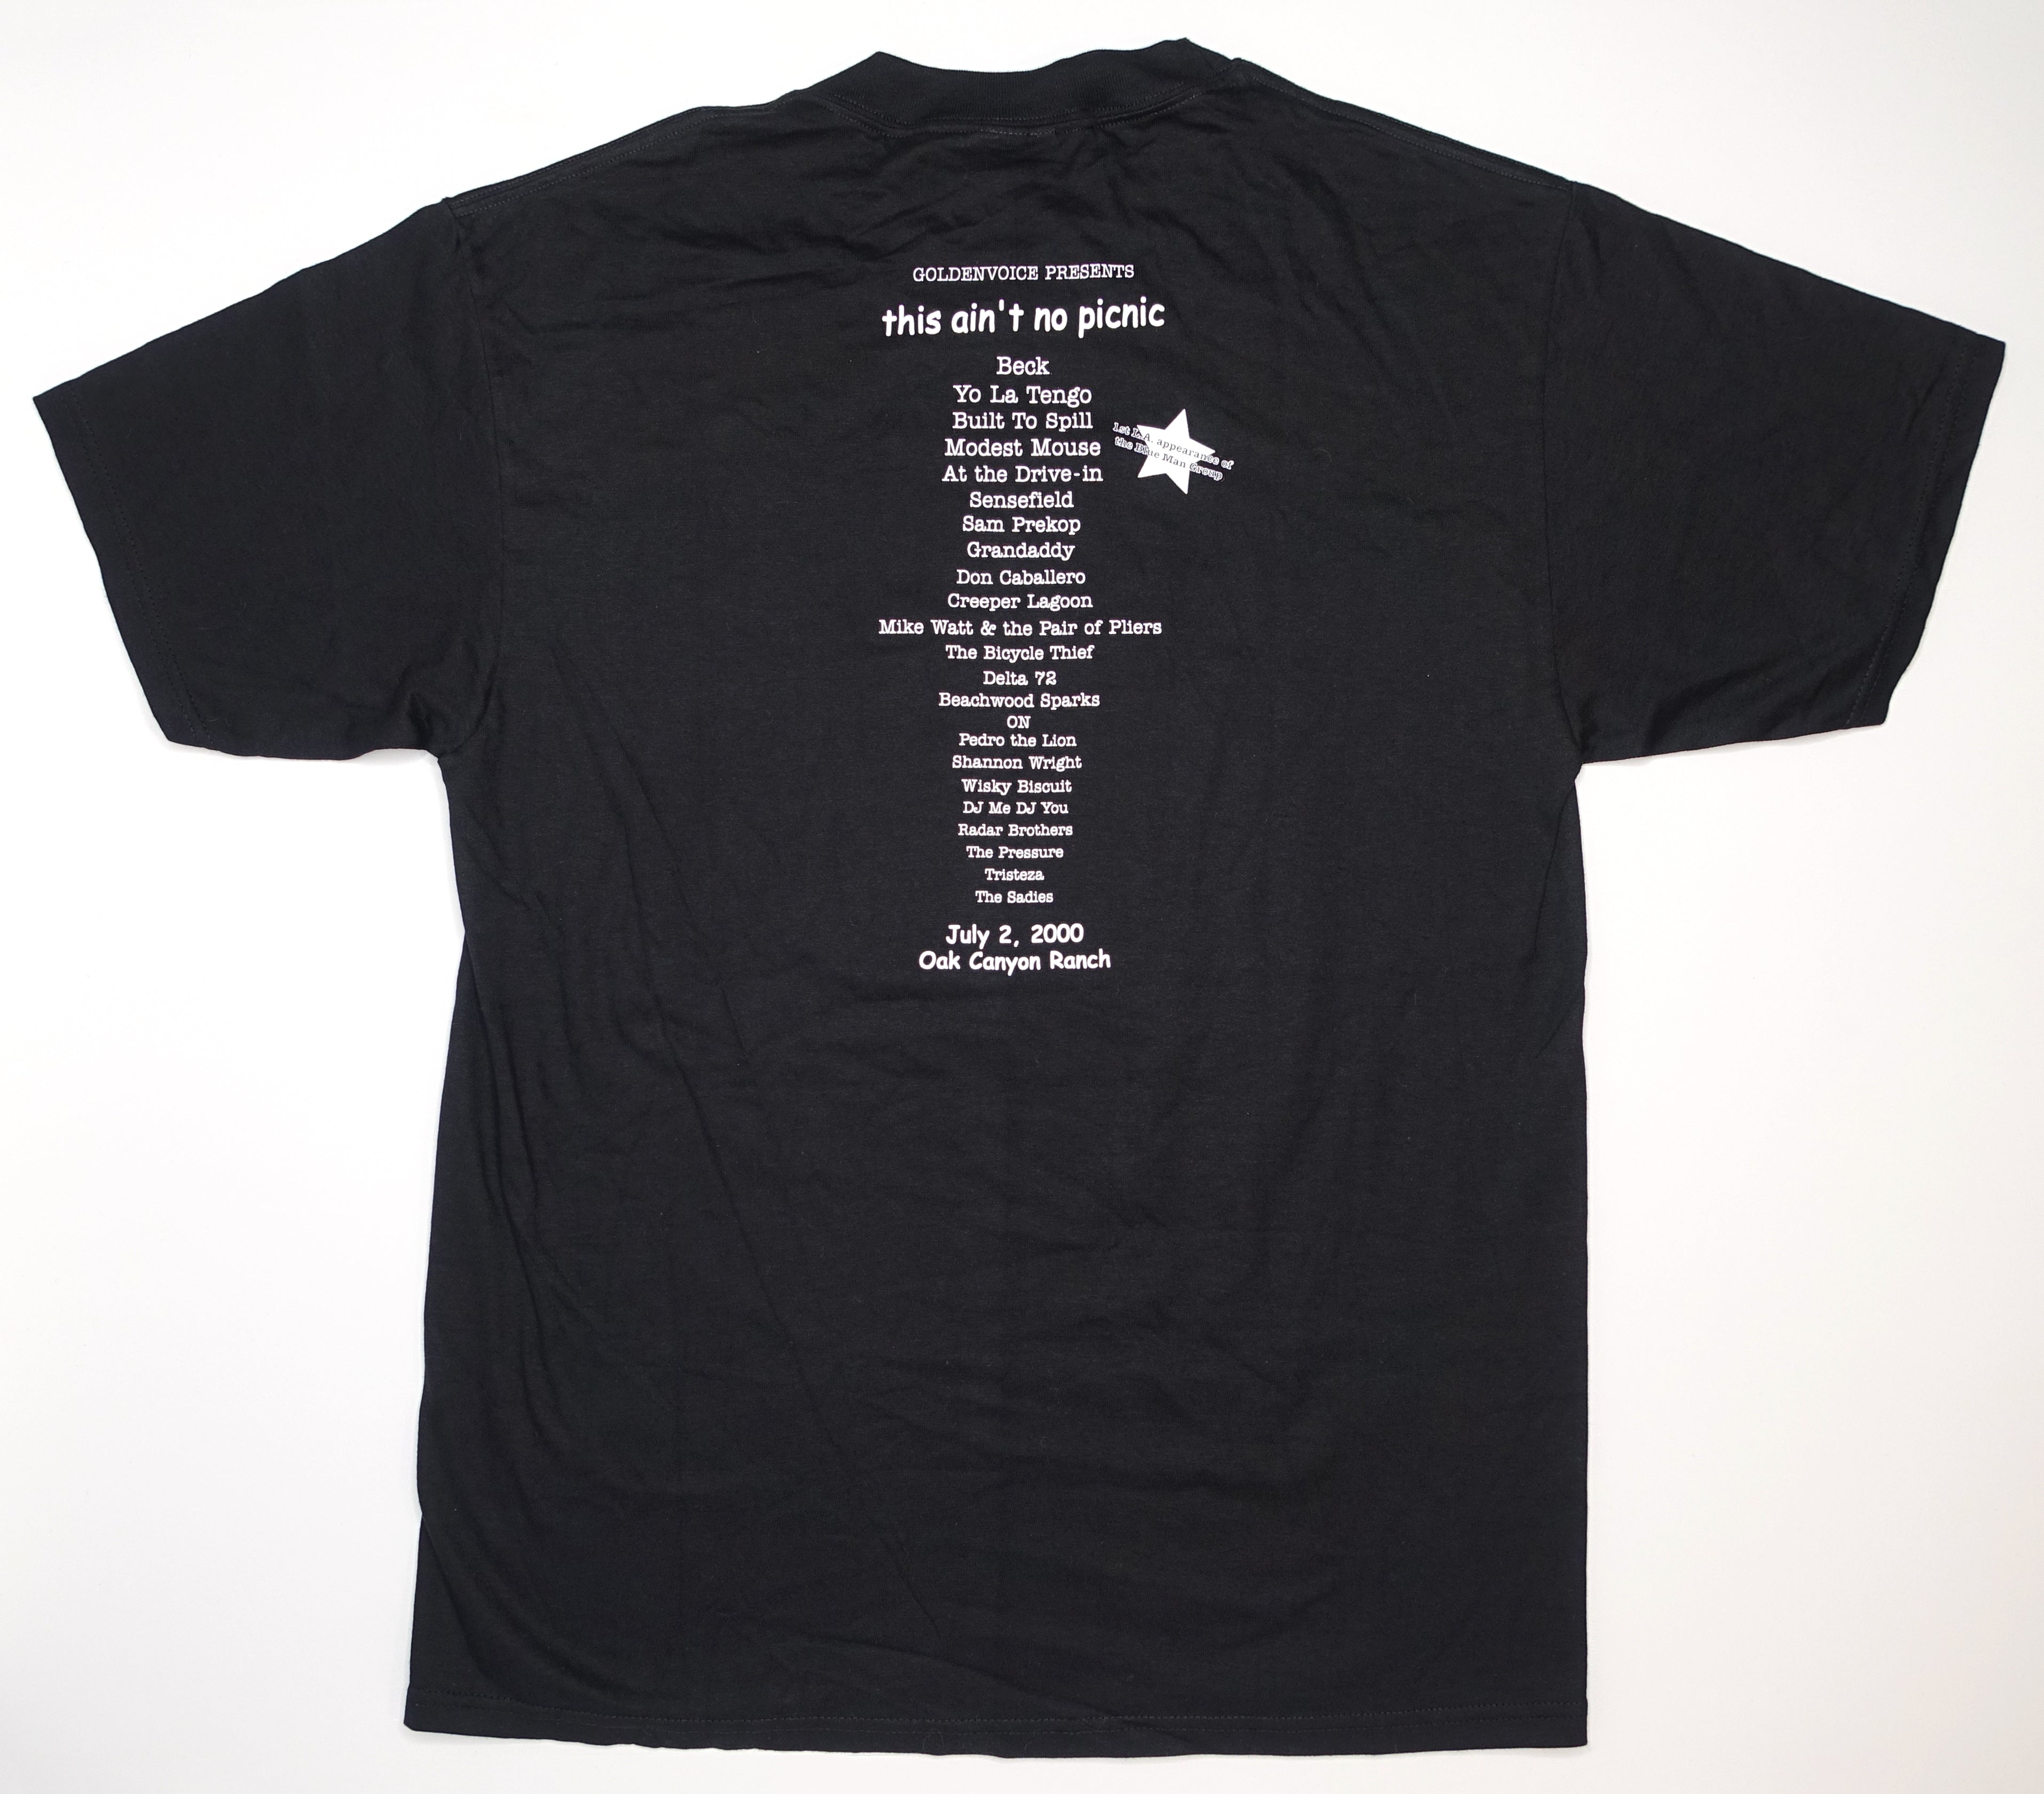 This Ain't No Picnic – July 2nd 2000 Concert Shirt Size Large